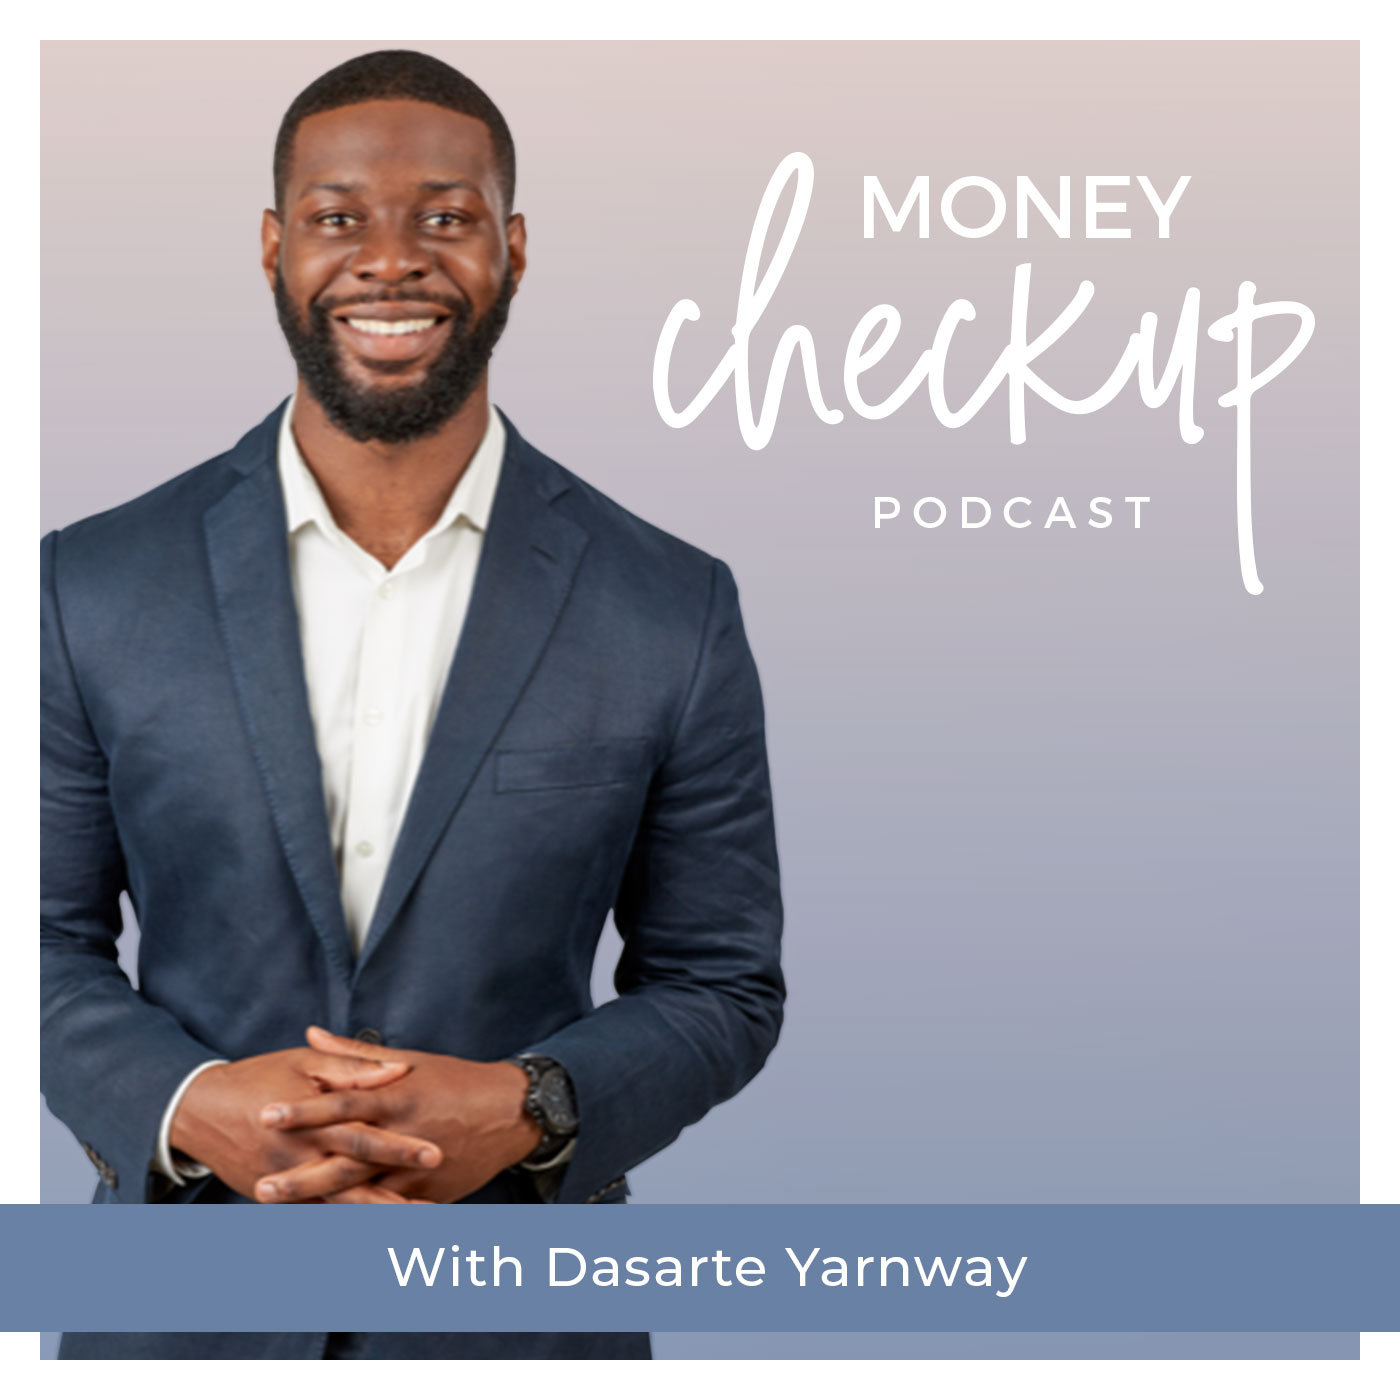 Money Checkup Podcast With Dasarte Yarnway